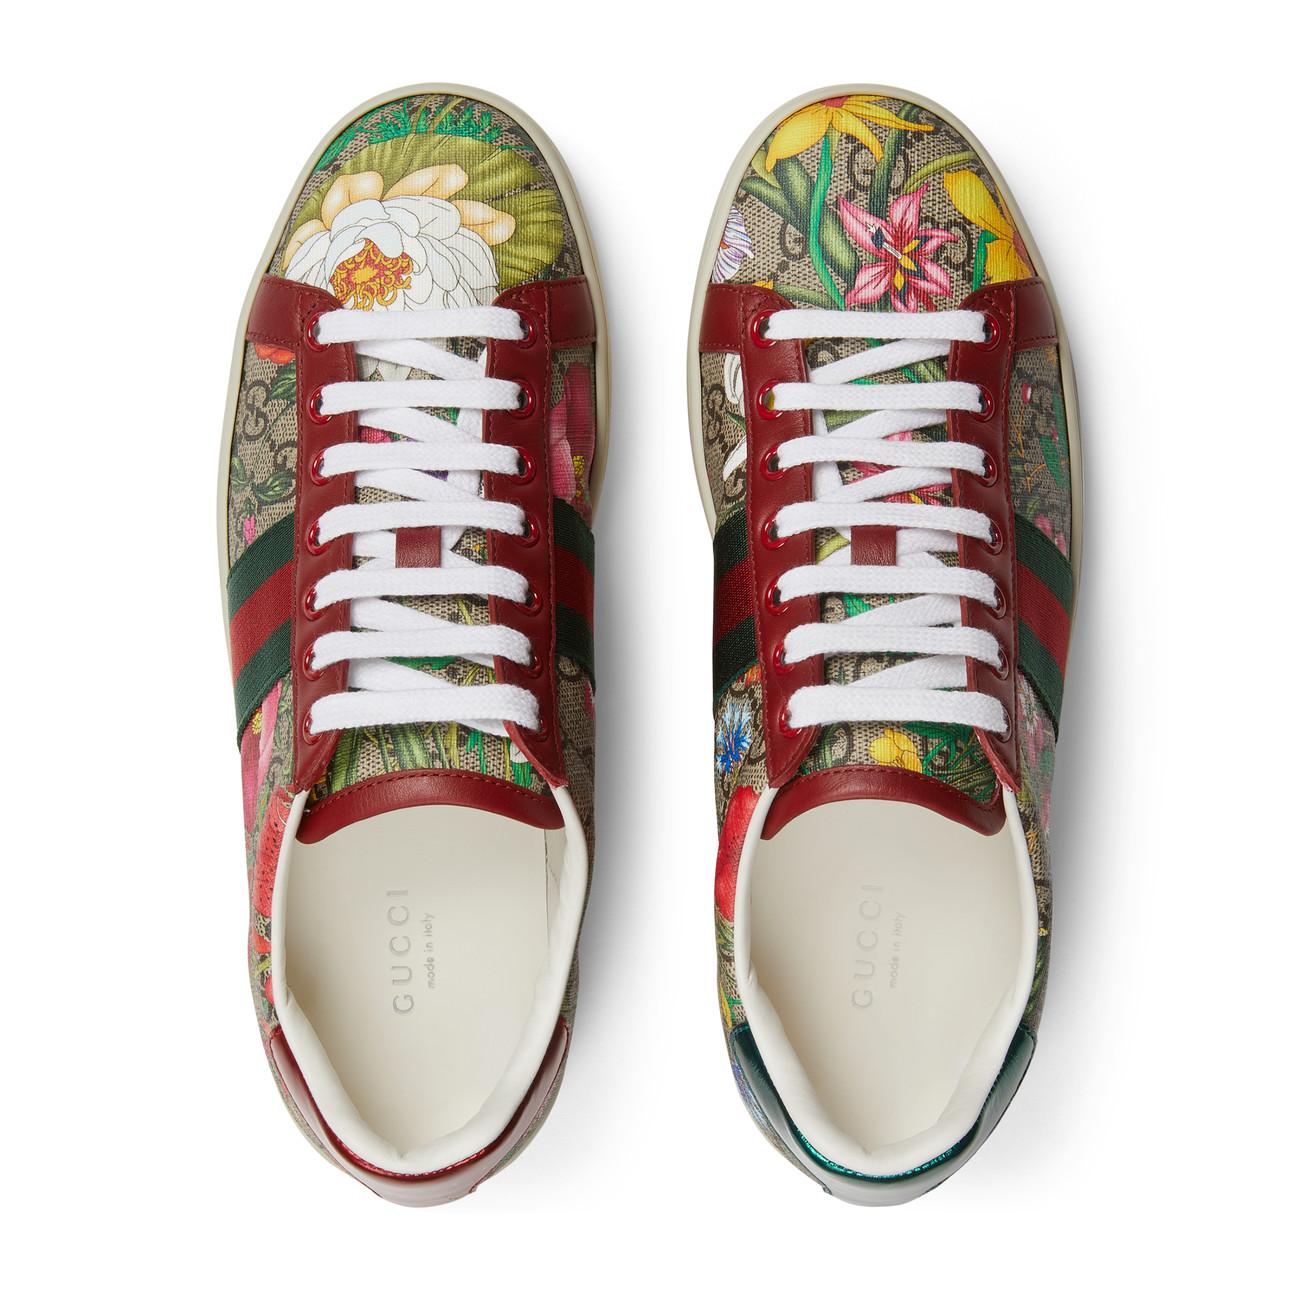 Gucci Ace Embroidered Low Top Sneaker, $680, farfetch.com